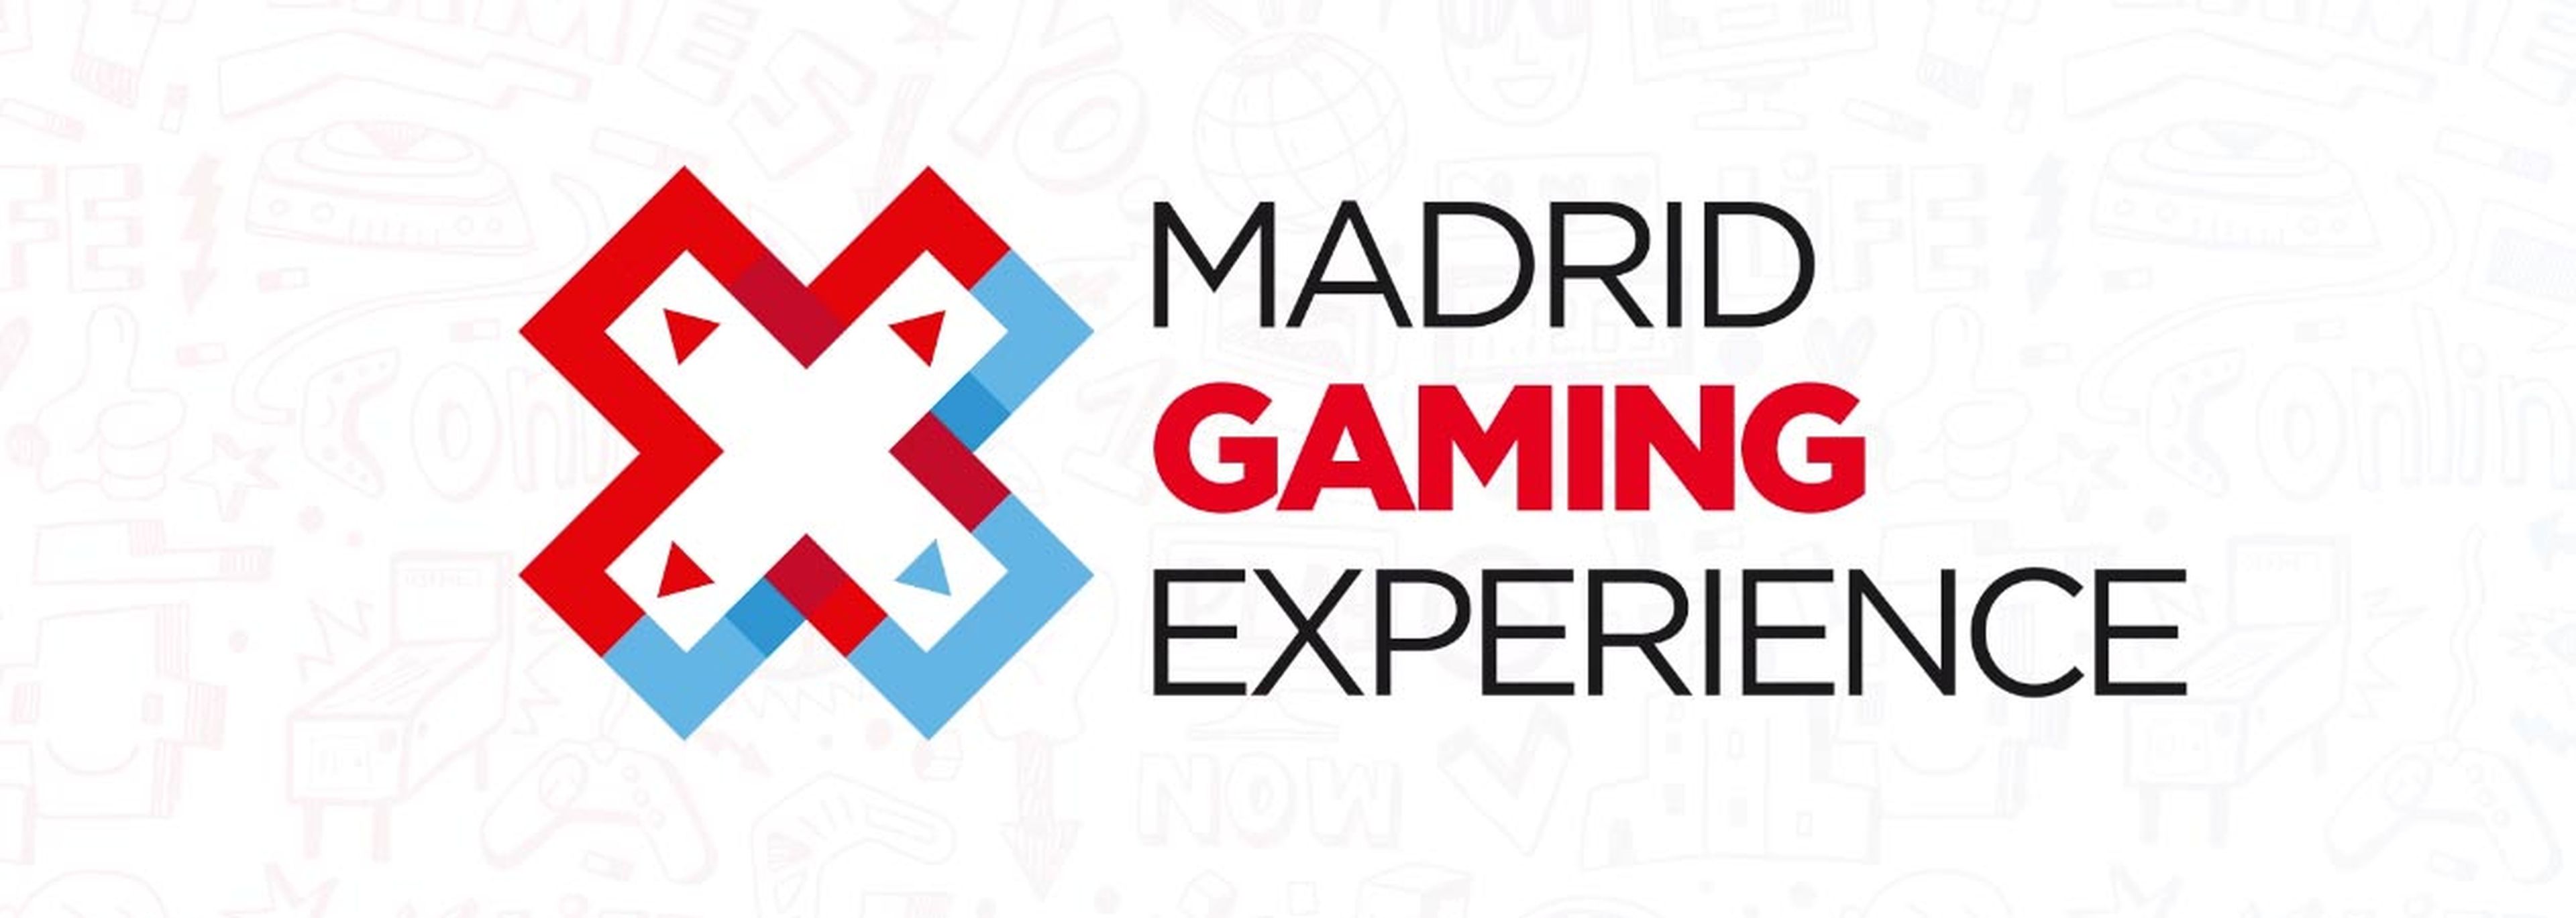 Madrid Gaming Experience Trailer